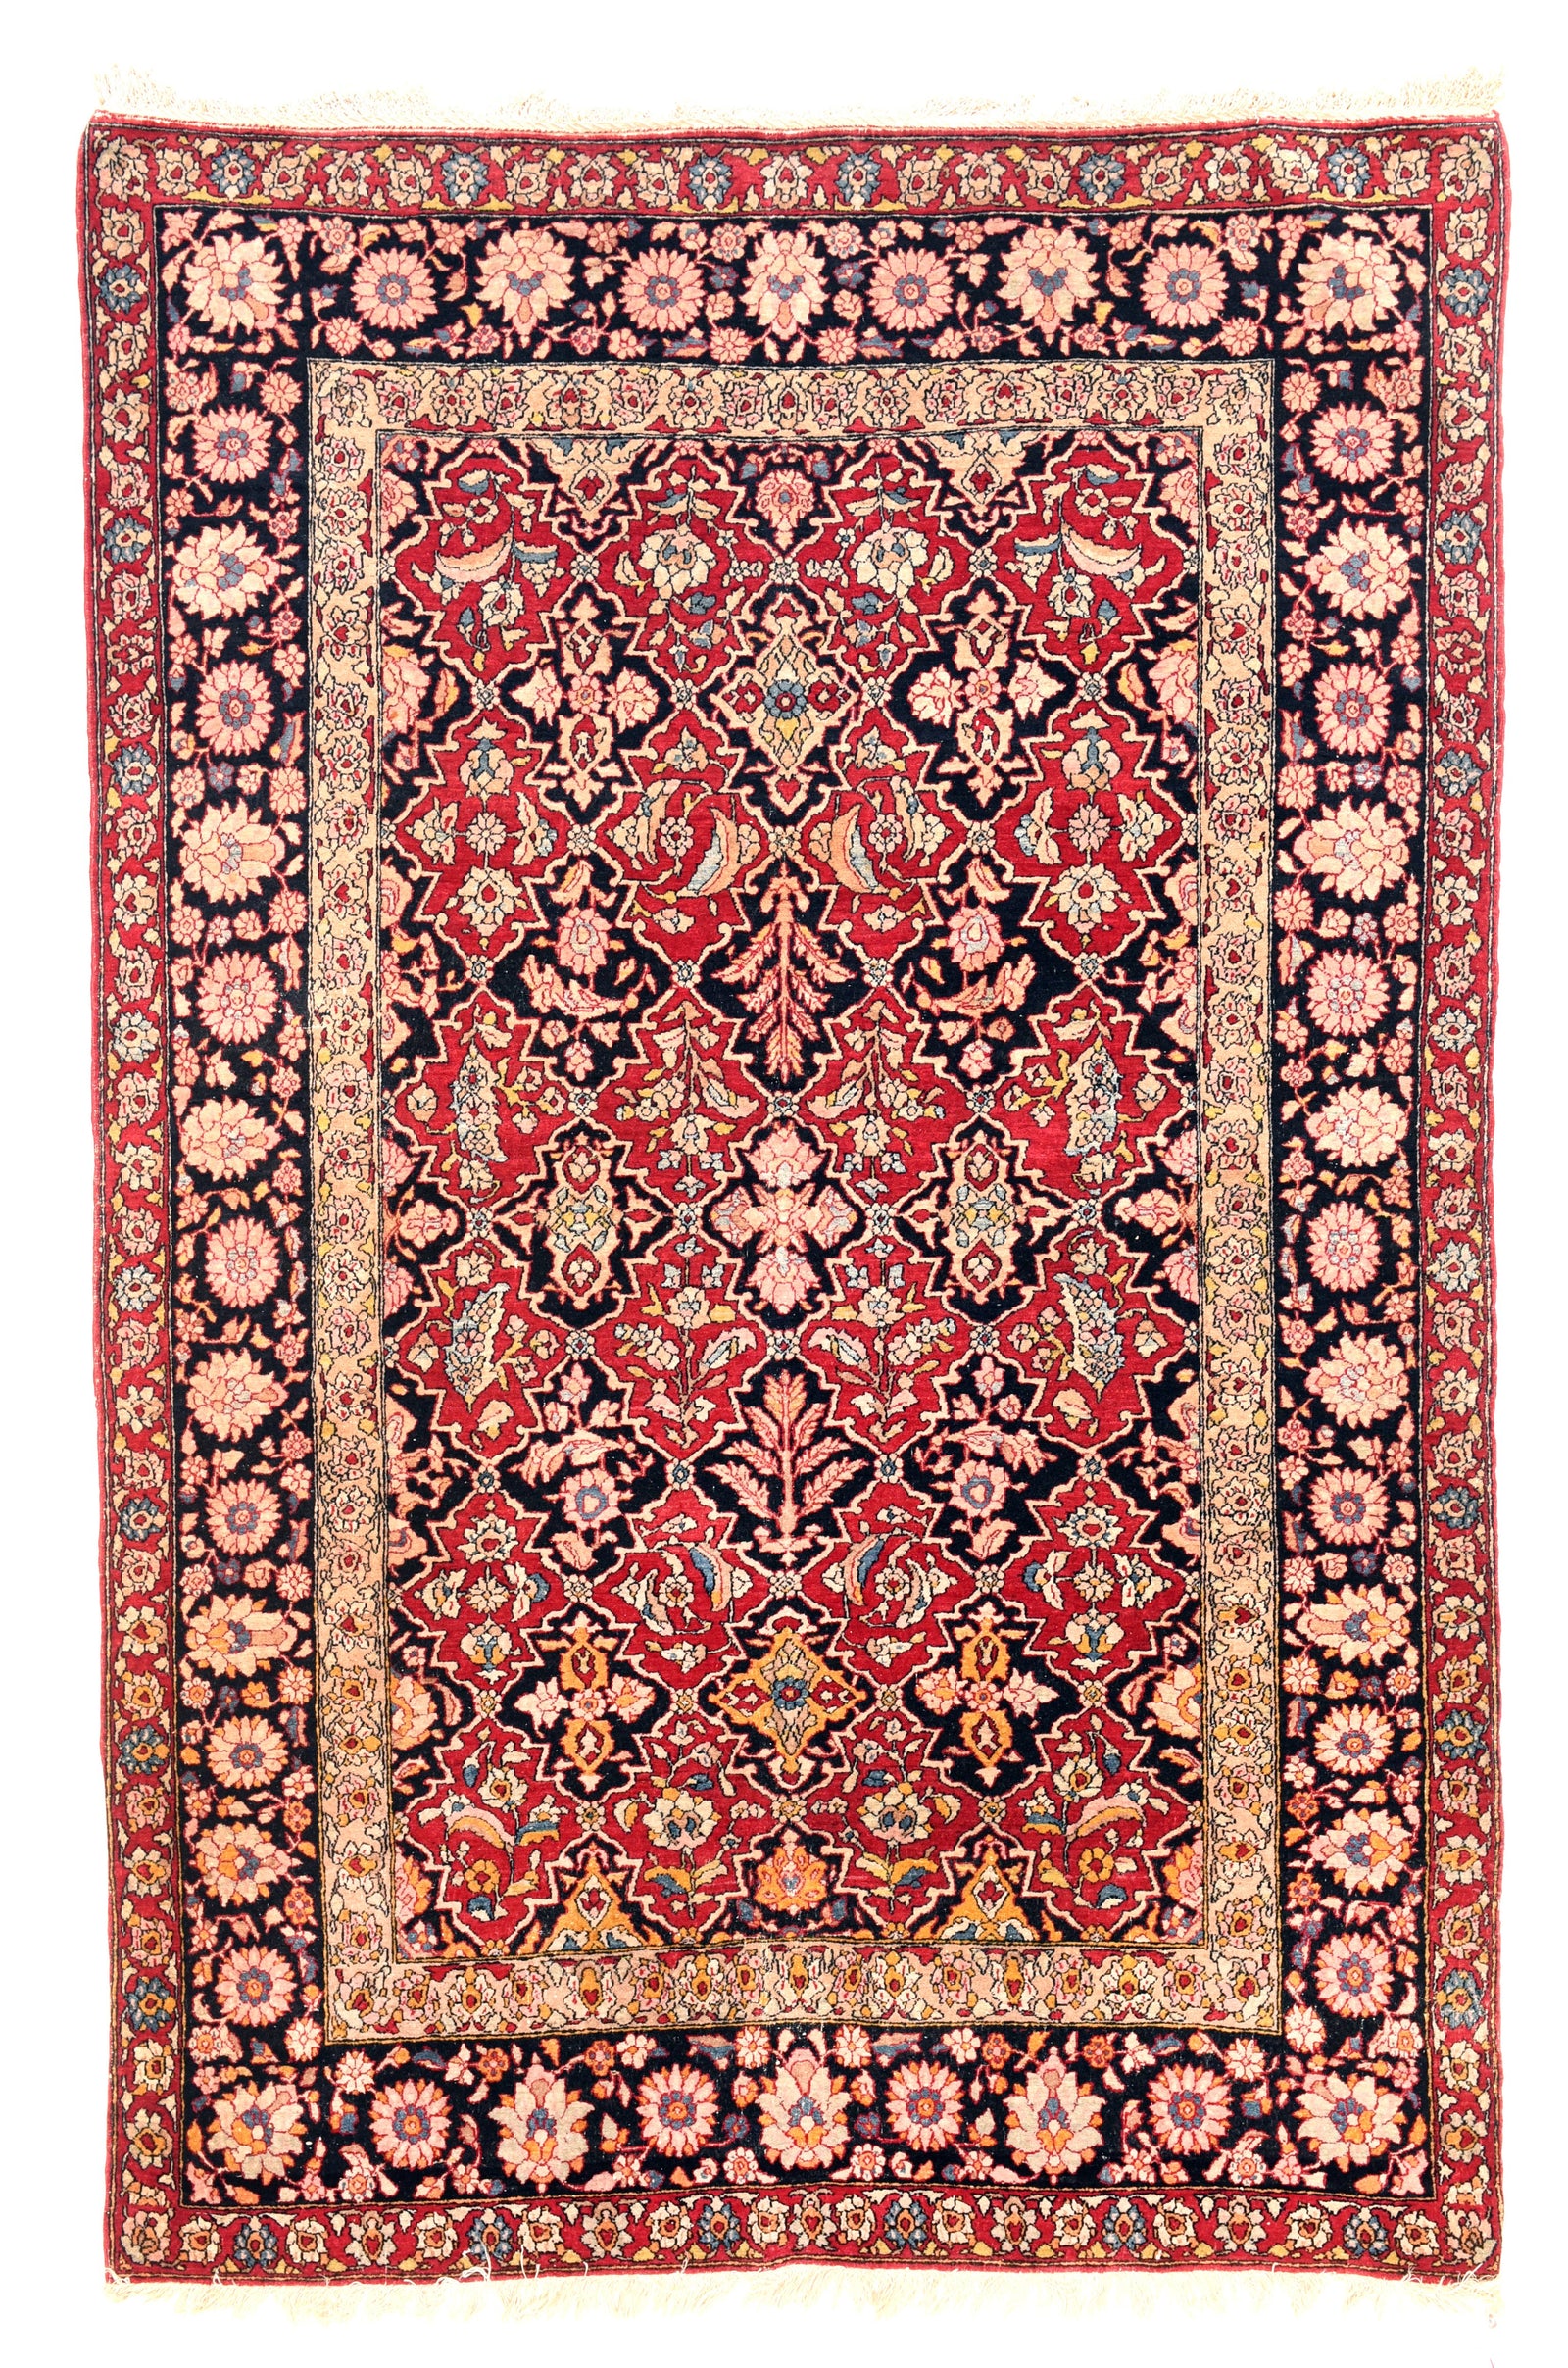 Antique Red overall pattern Isfahan Persian Area Rug